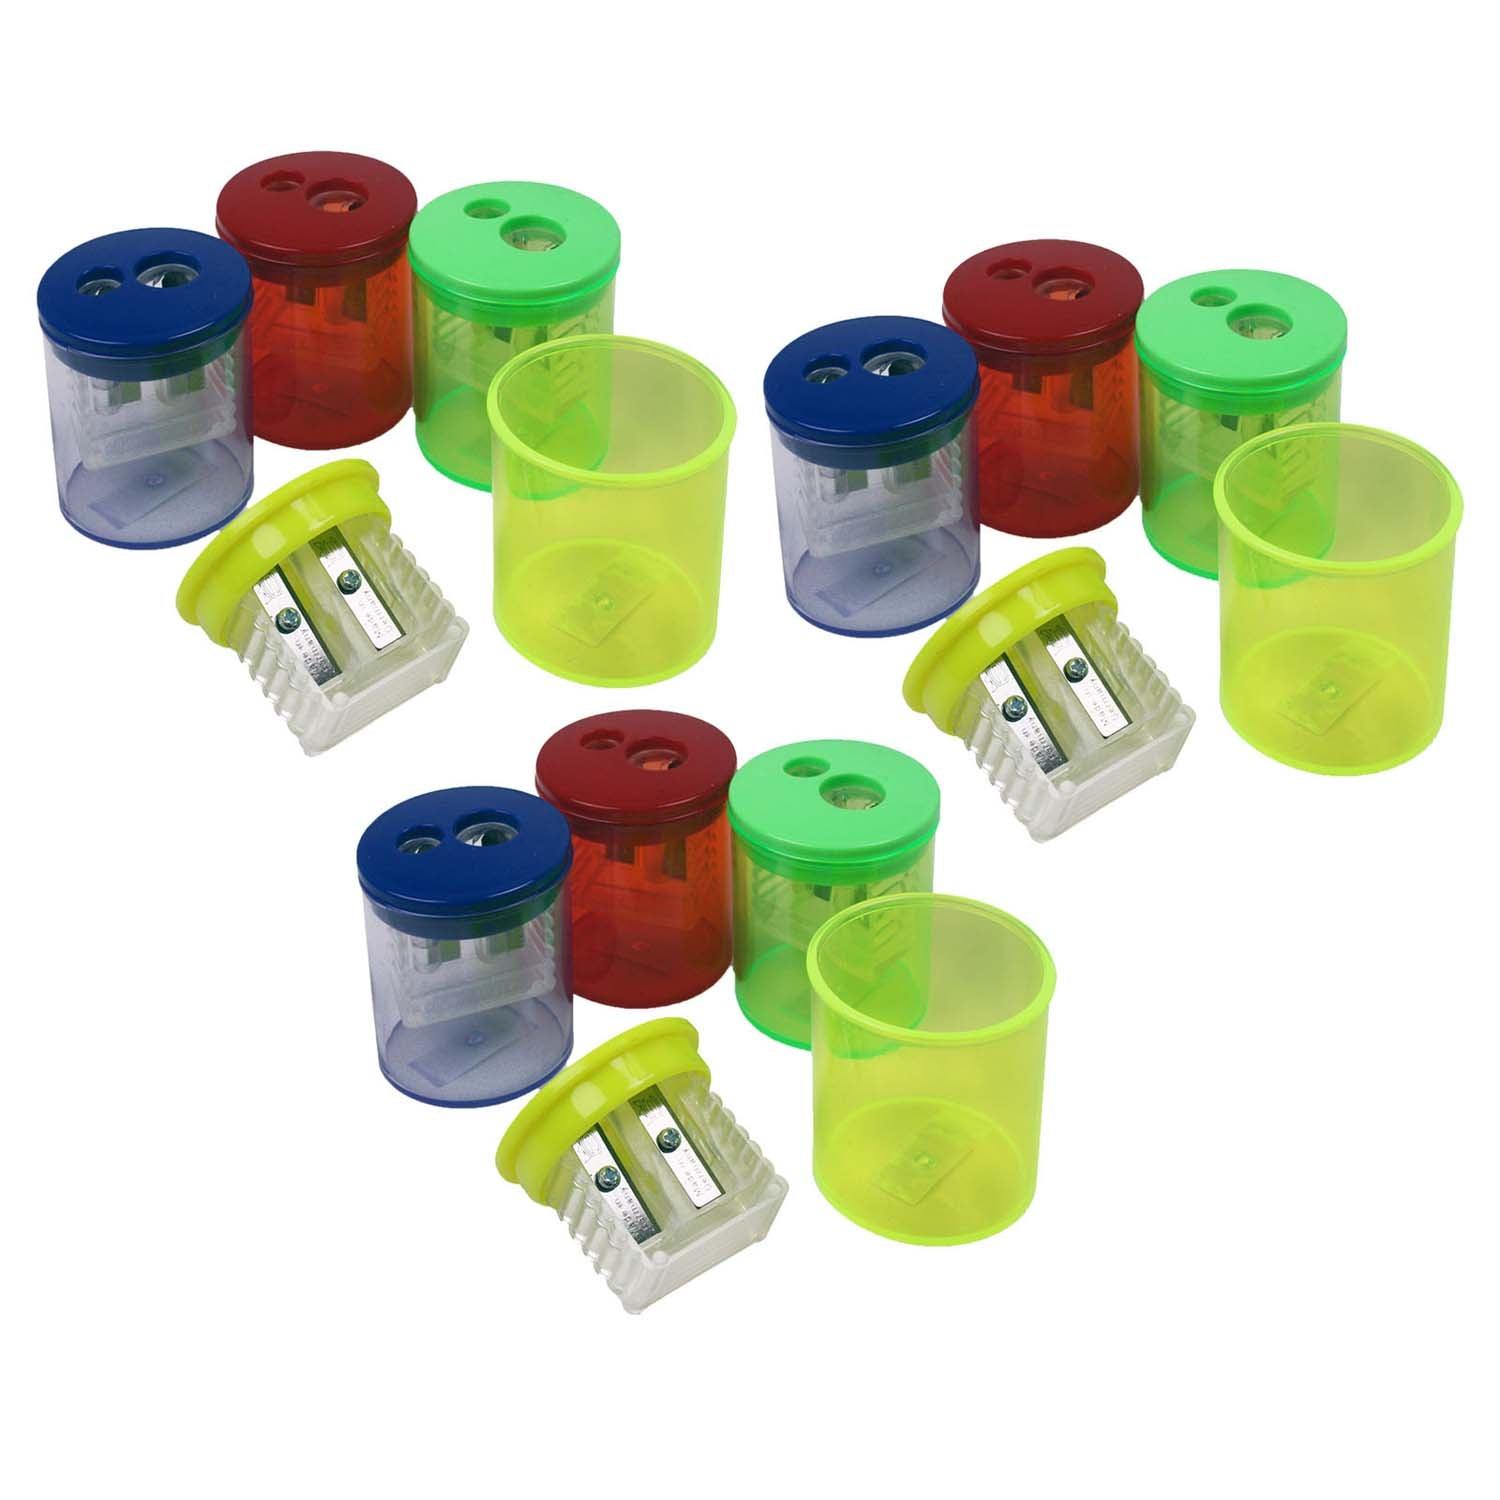 Two-Hole Pencil Sharpener, Assorted Colors, Pack of 12 - Loomini